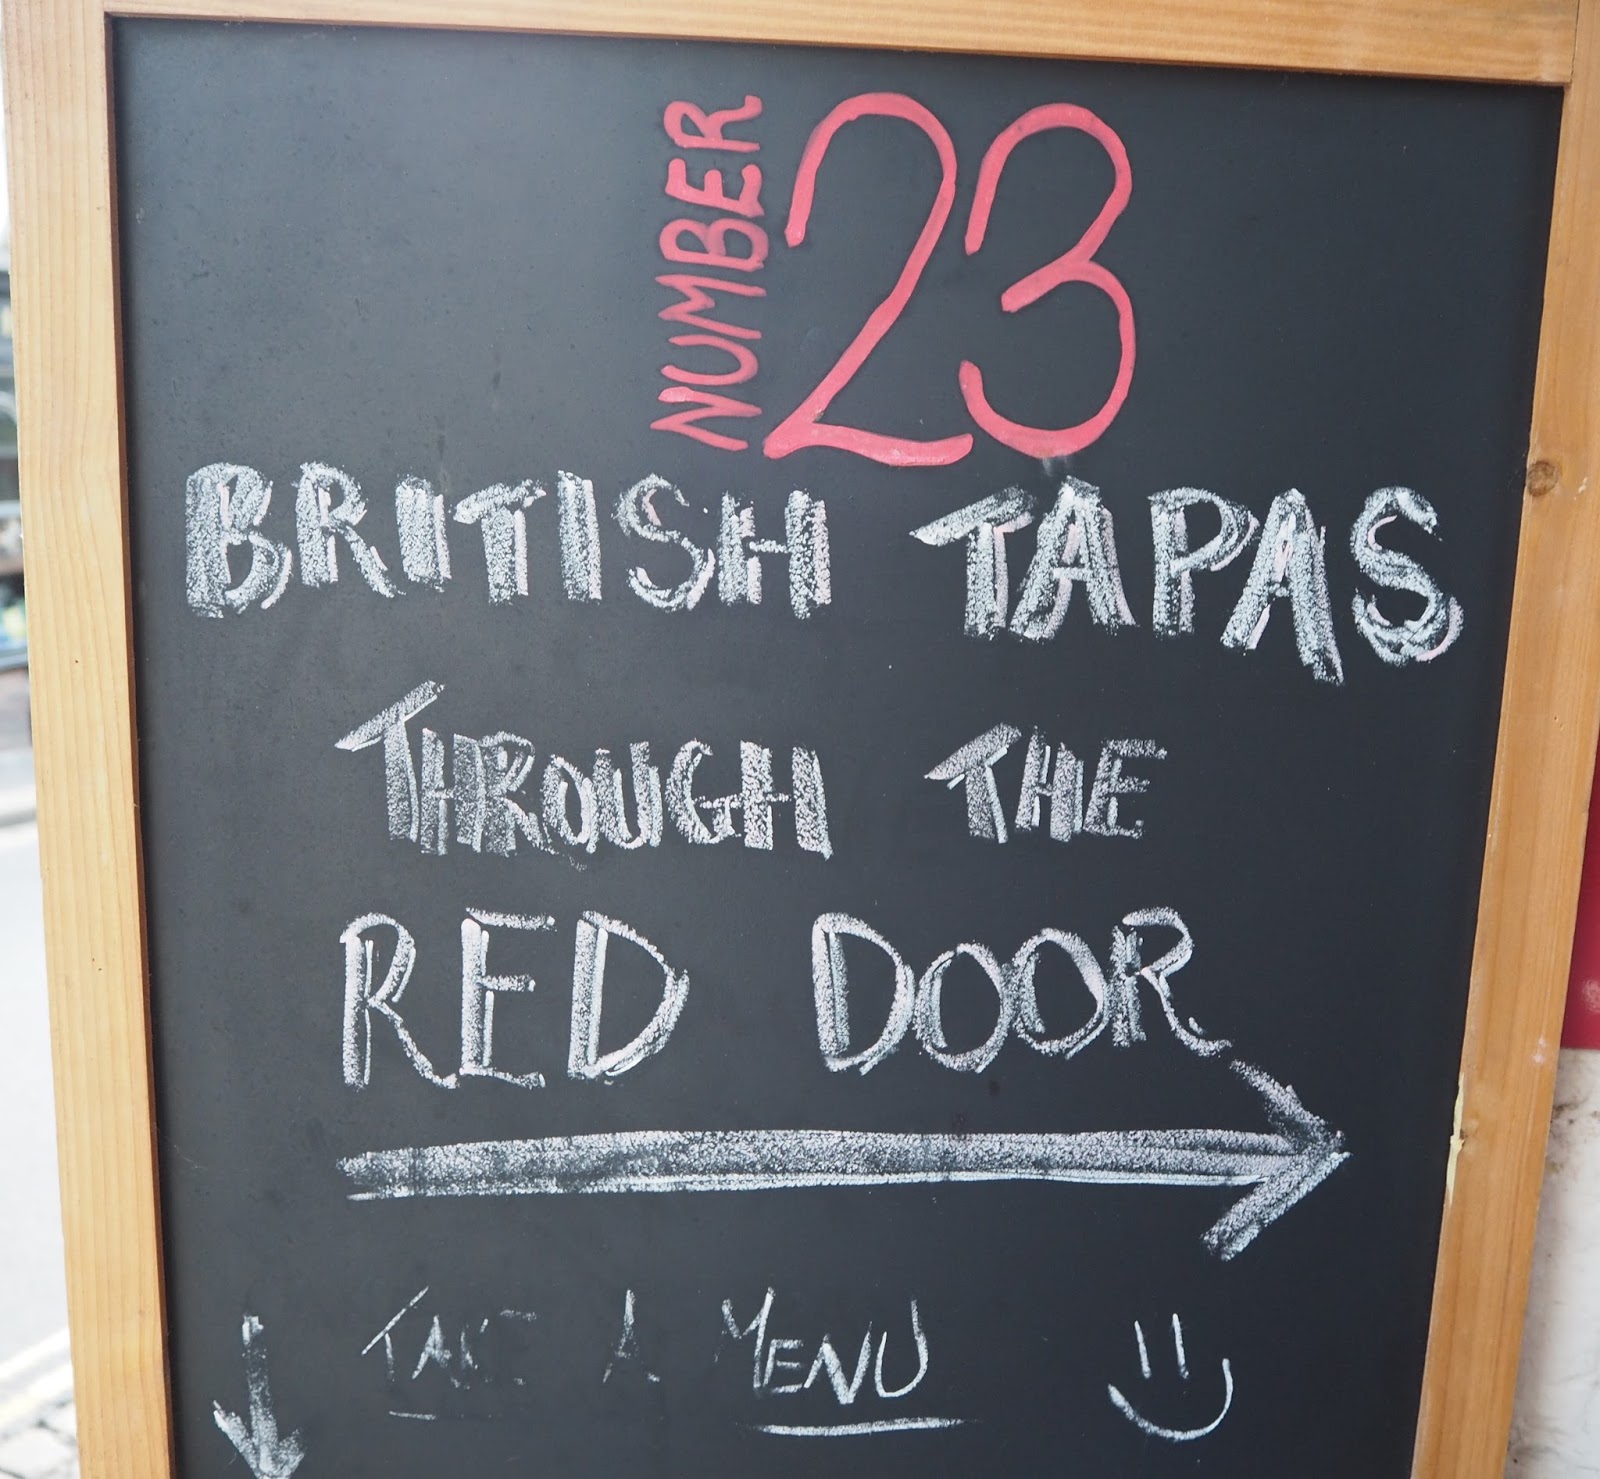 Restaurant review of Number 23 (British Tapas) in St Albans, UK